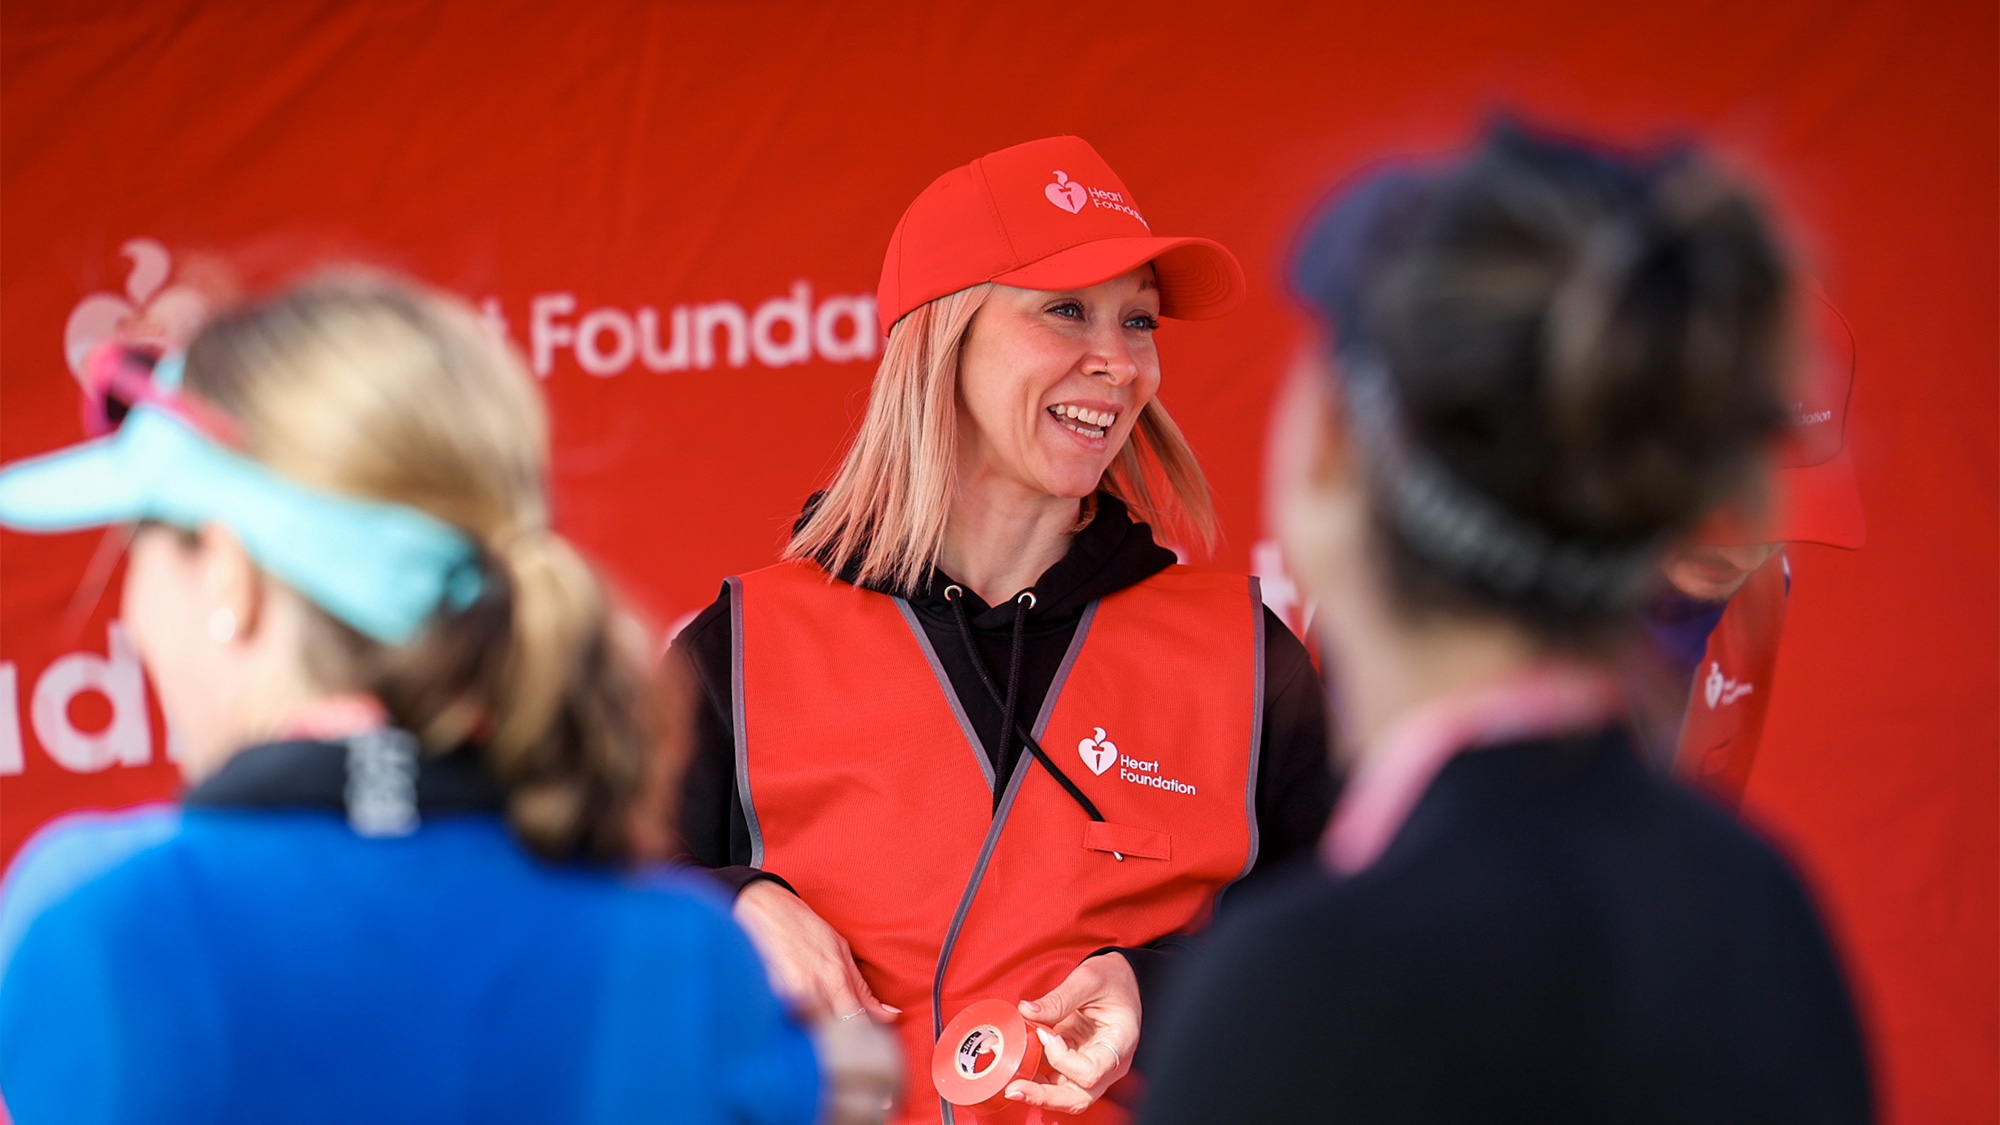 Heart Foundation team member smiling while at a volunteer event.